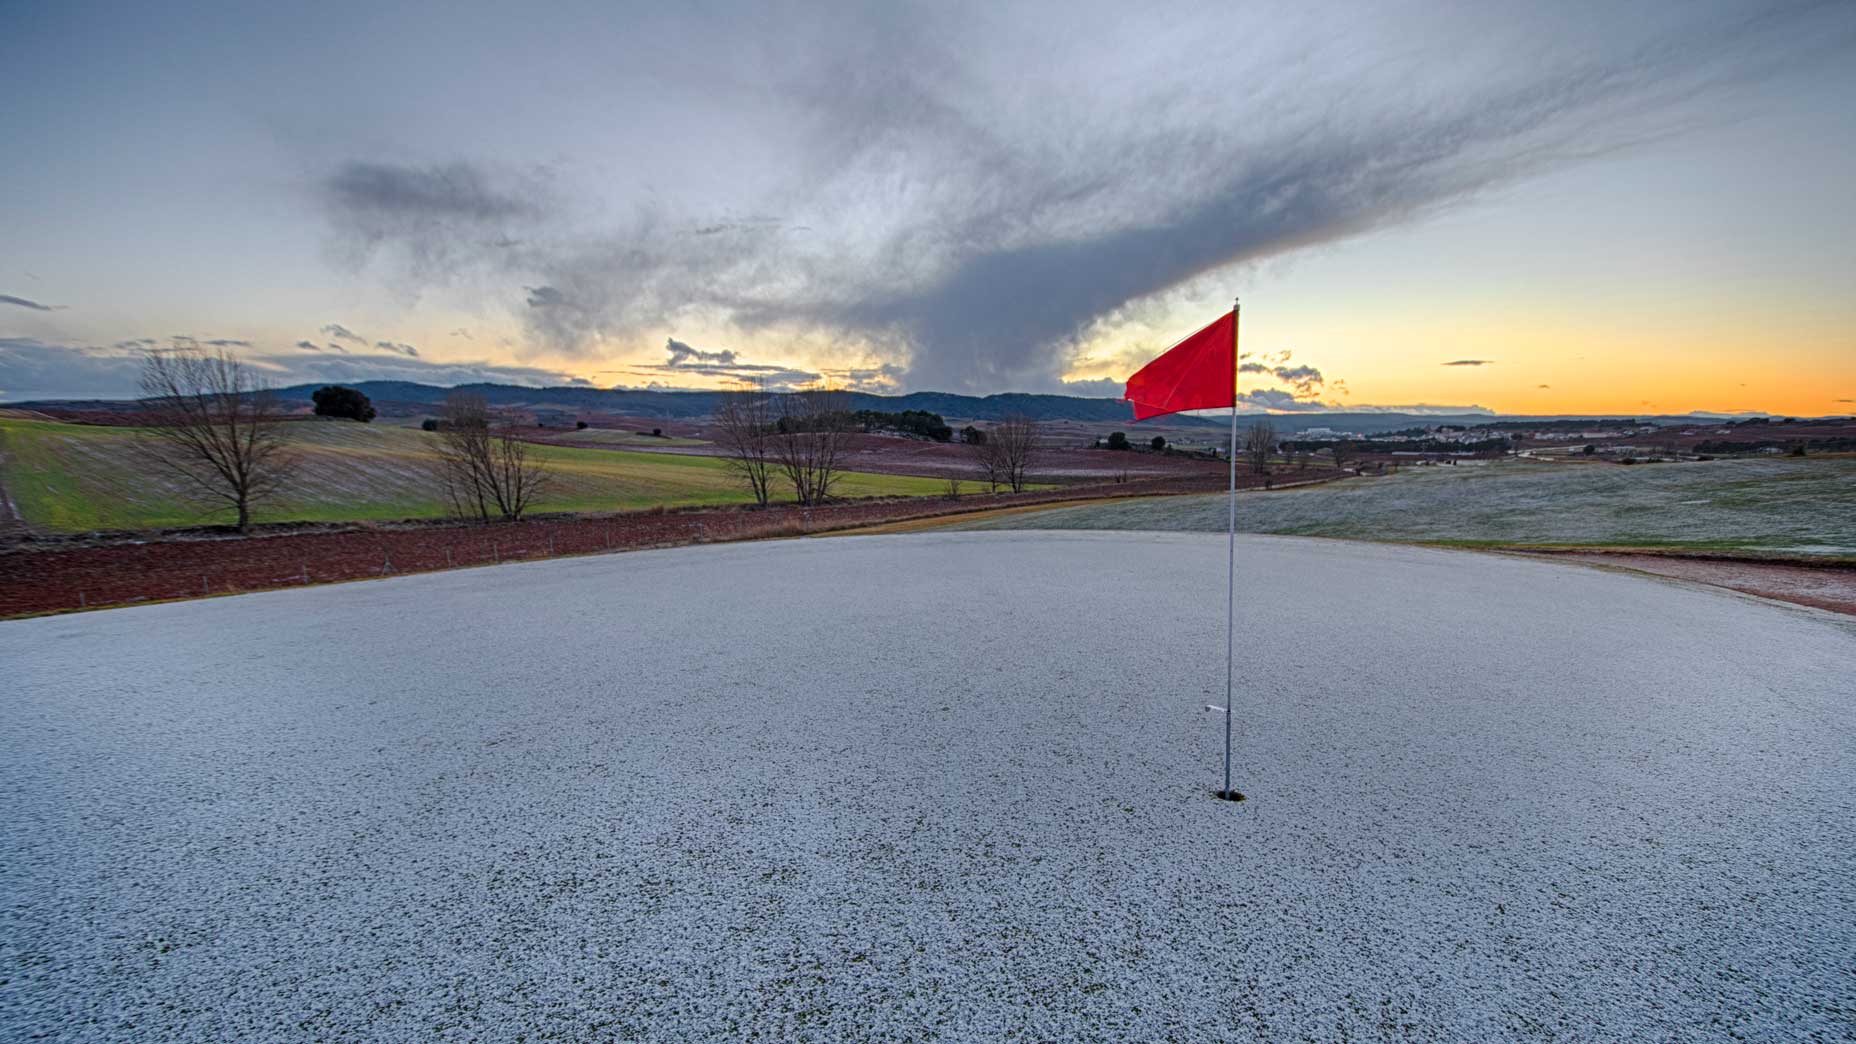 How to play golf in the cold: 8 tips for conquering winter golf